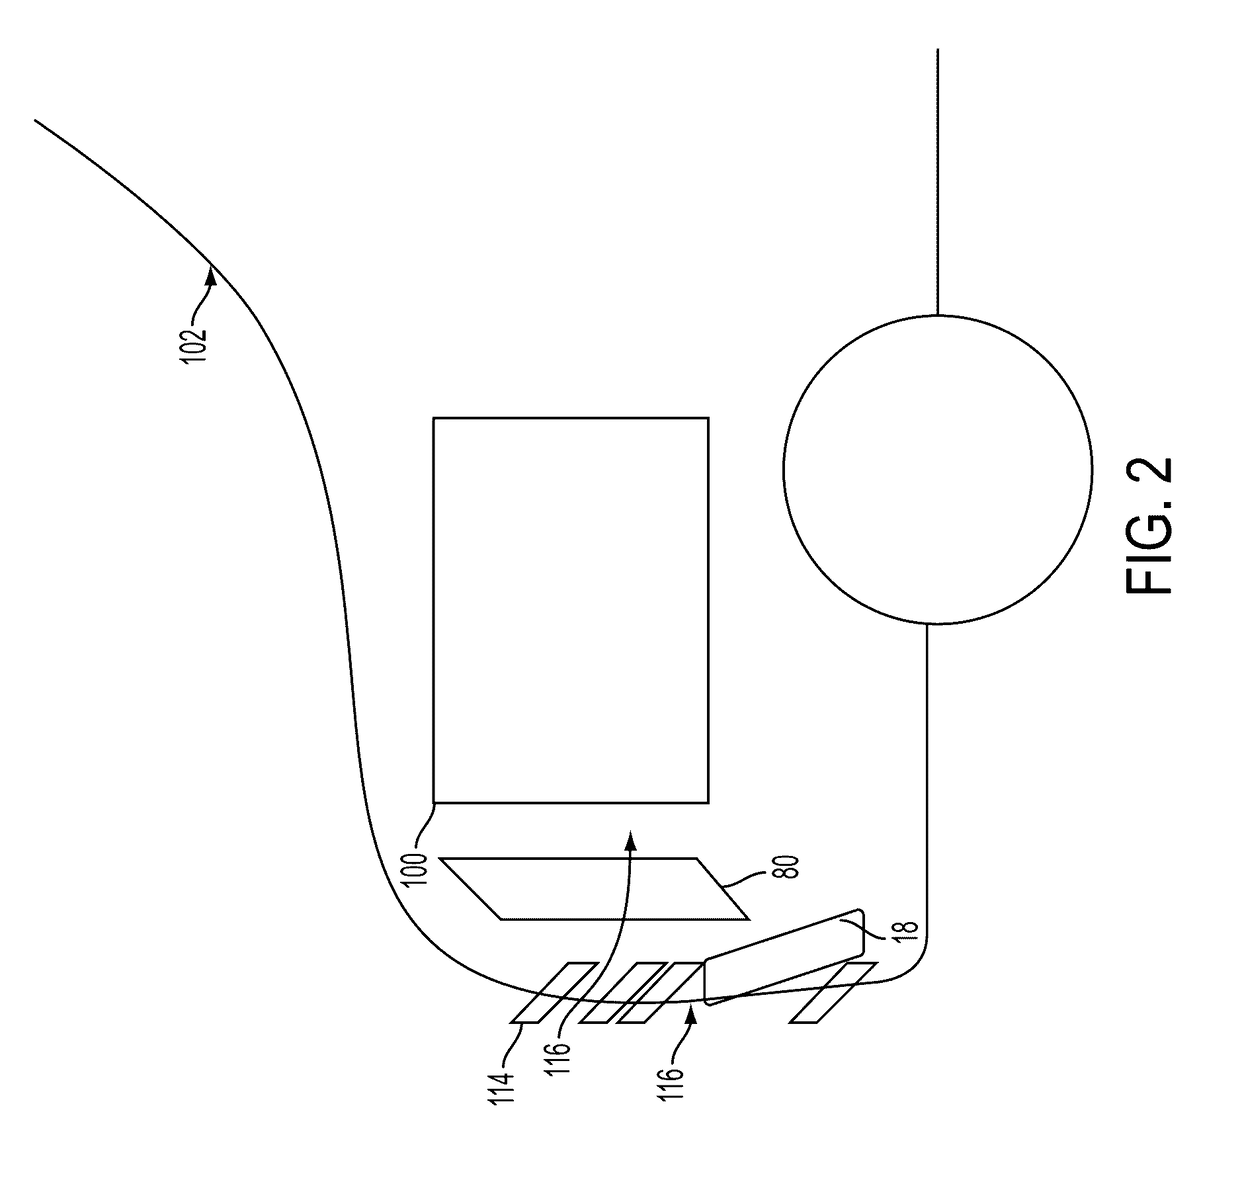 Engine control coordination with grille shutter adjustment and ambient conditions